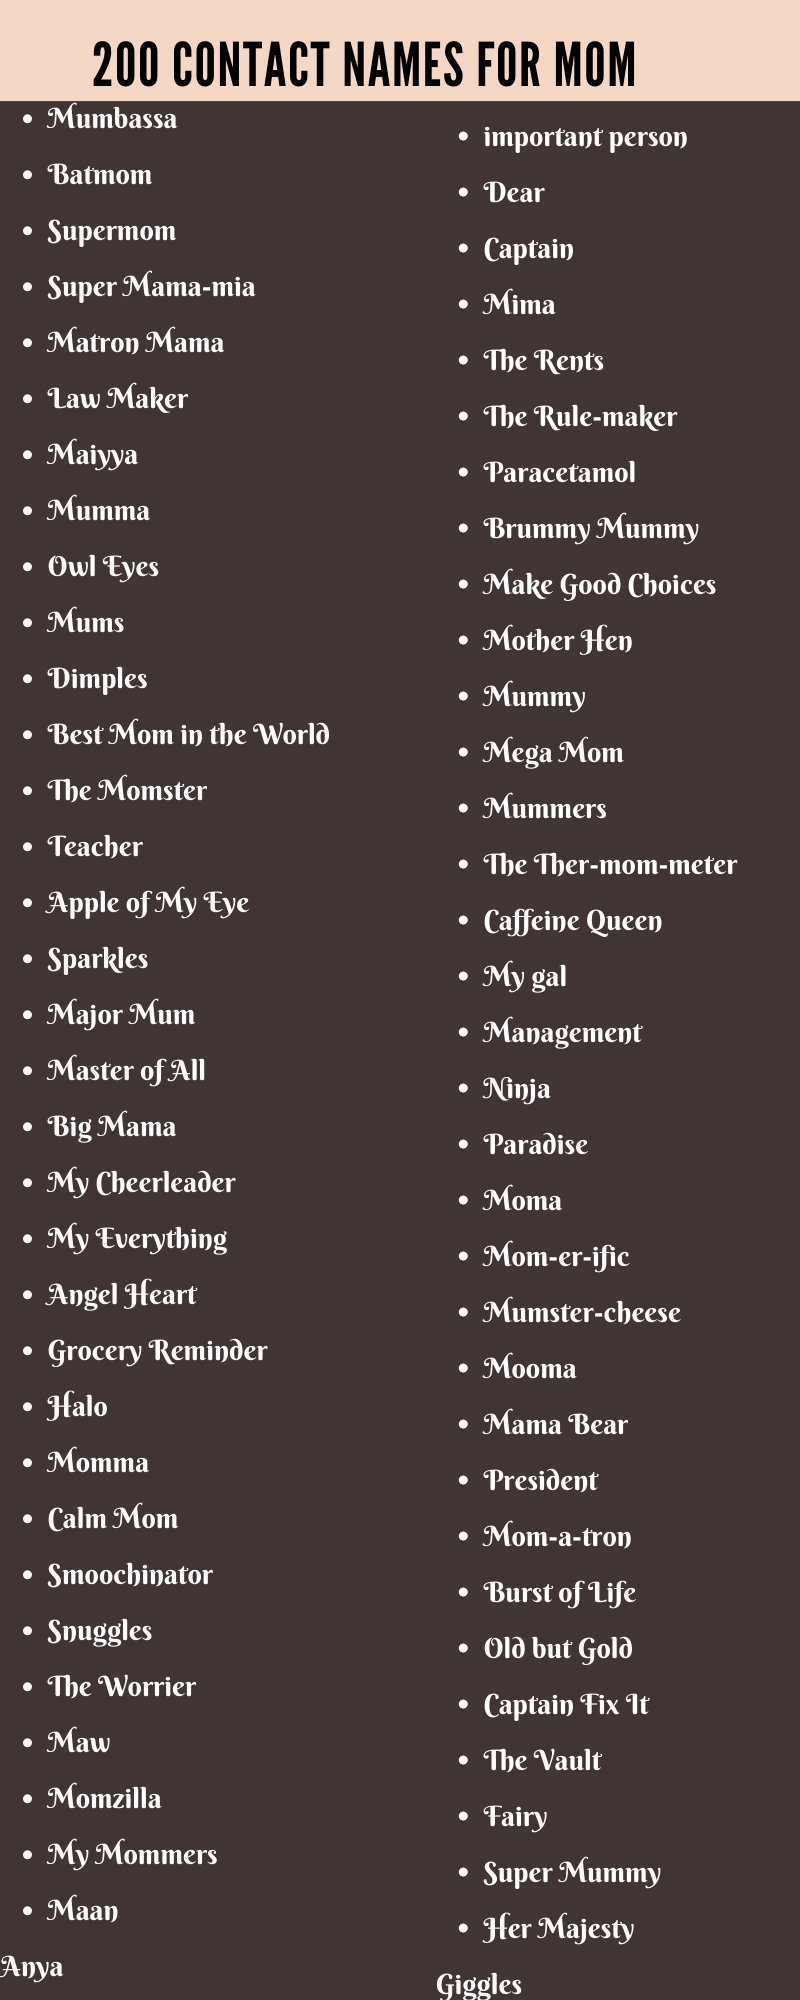 Contact Names For Mom